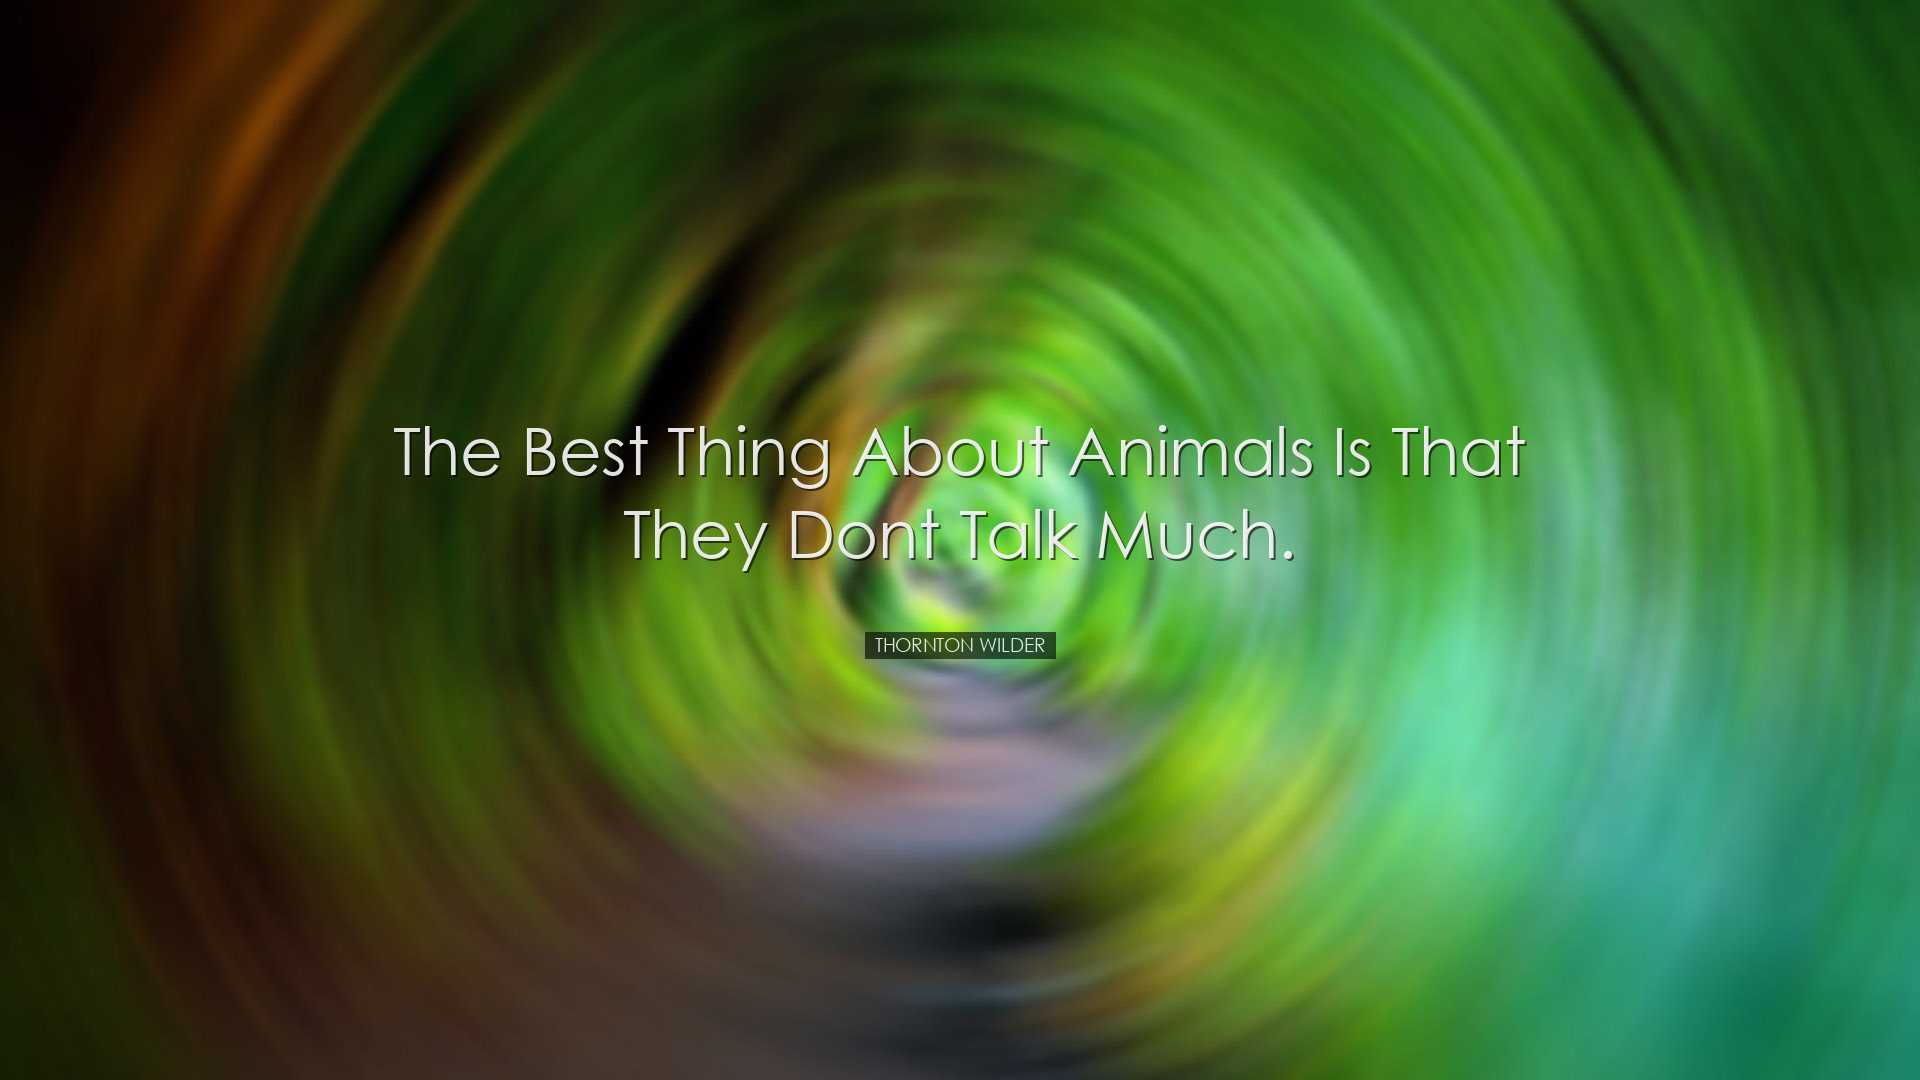 The best thing about animals is that they dont talk much. - Thornt